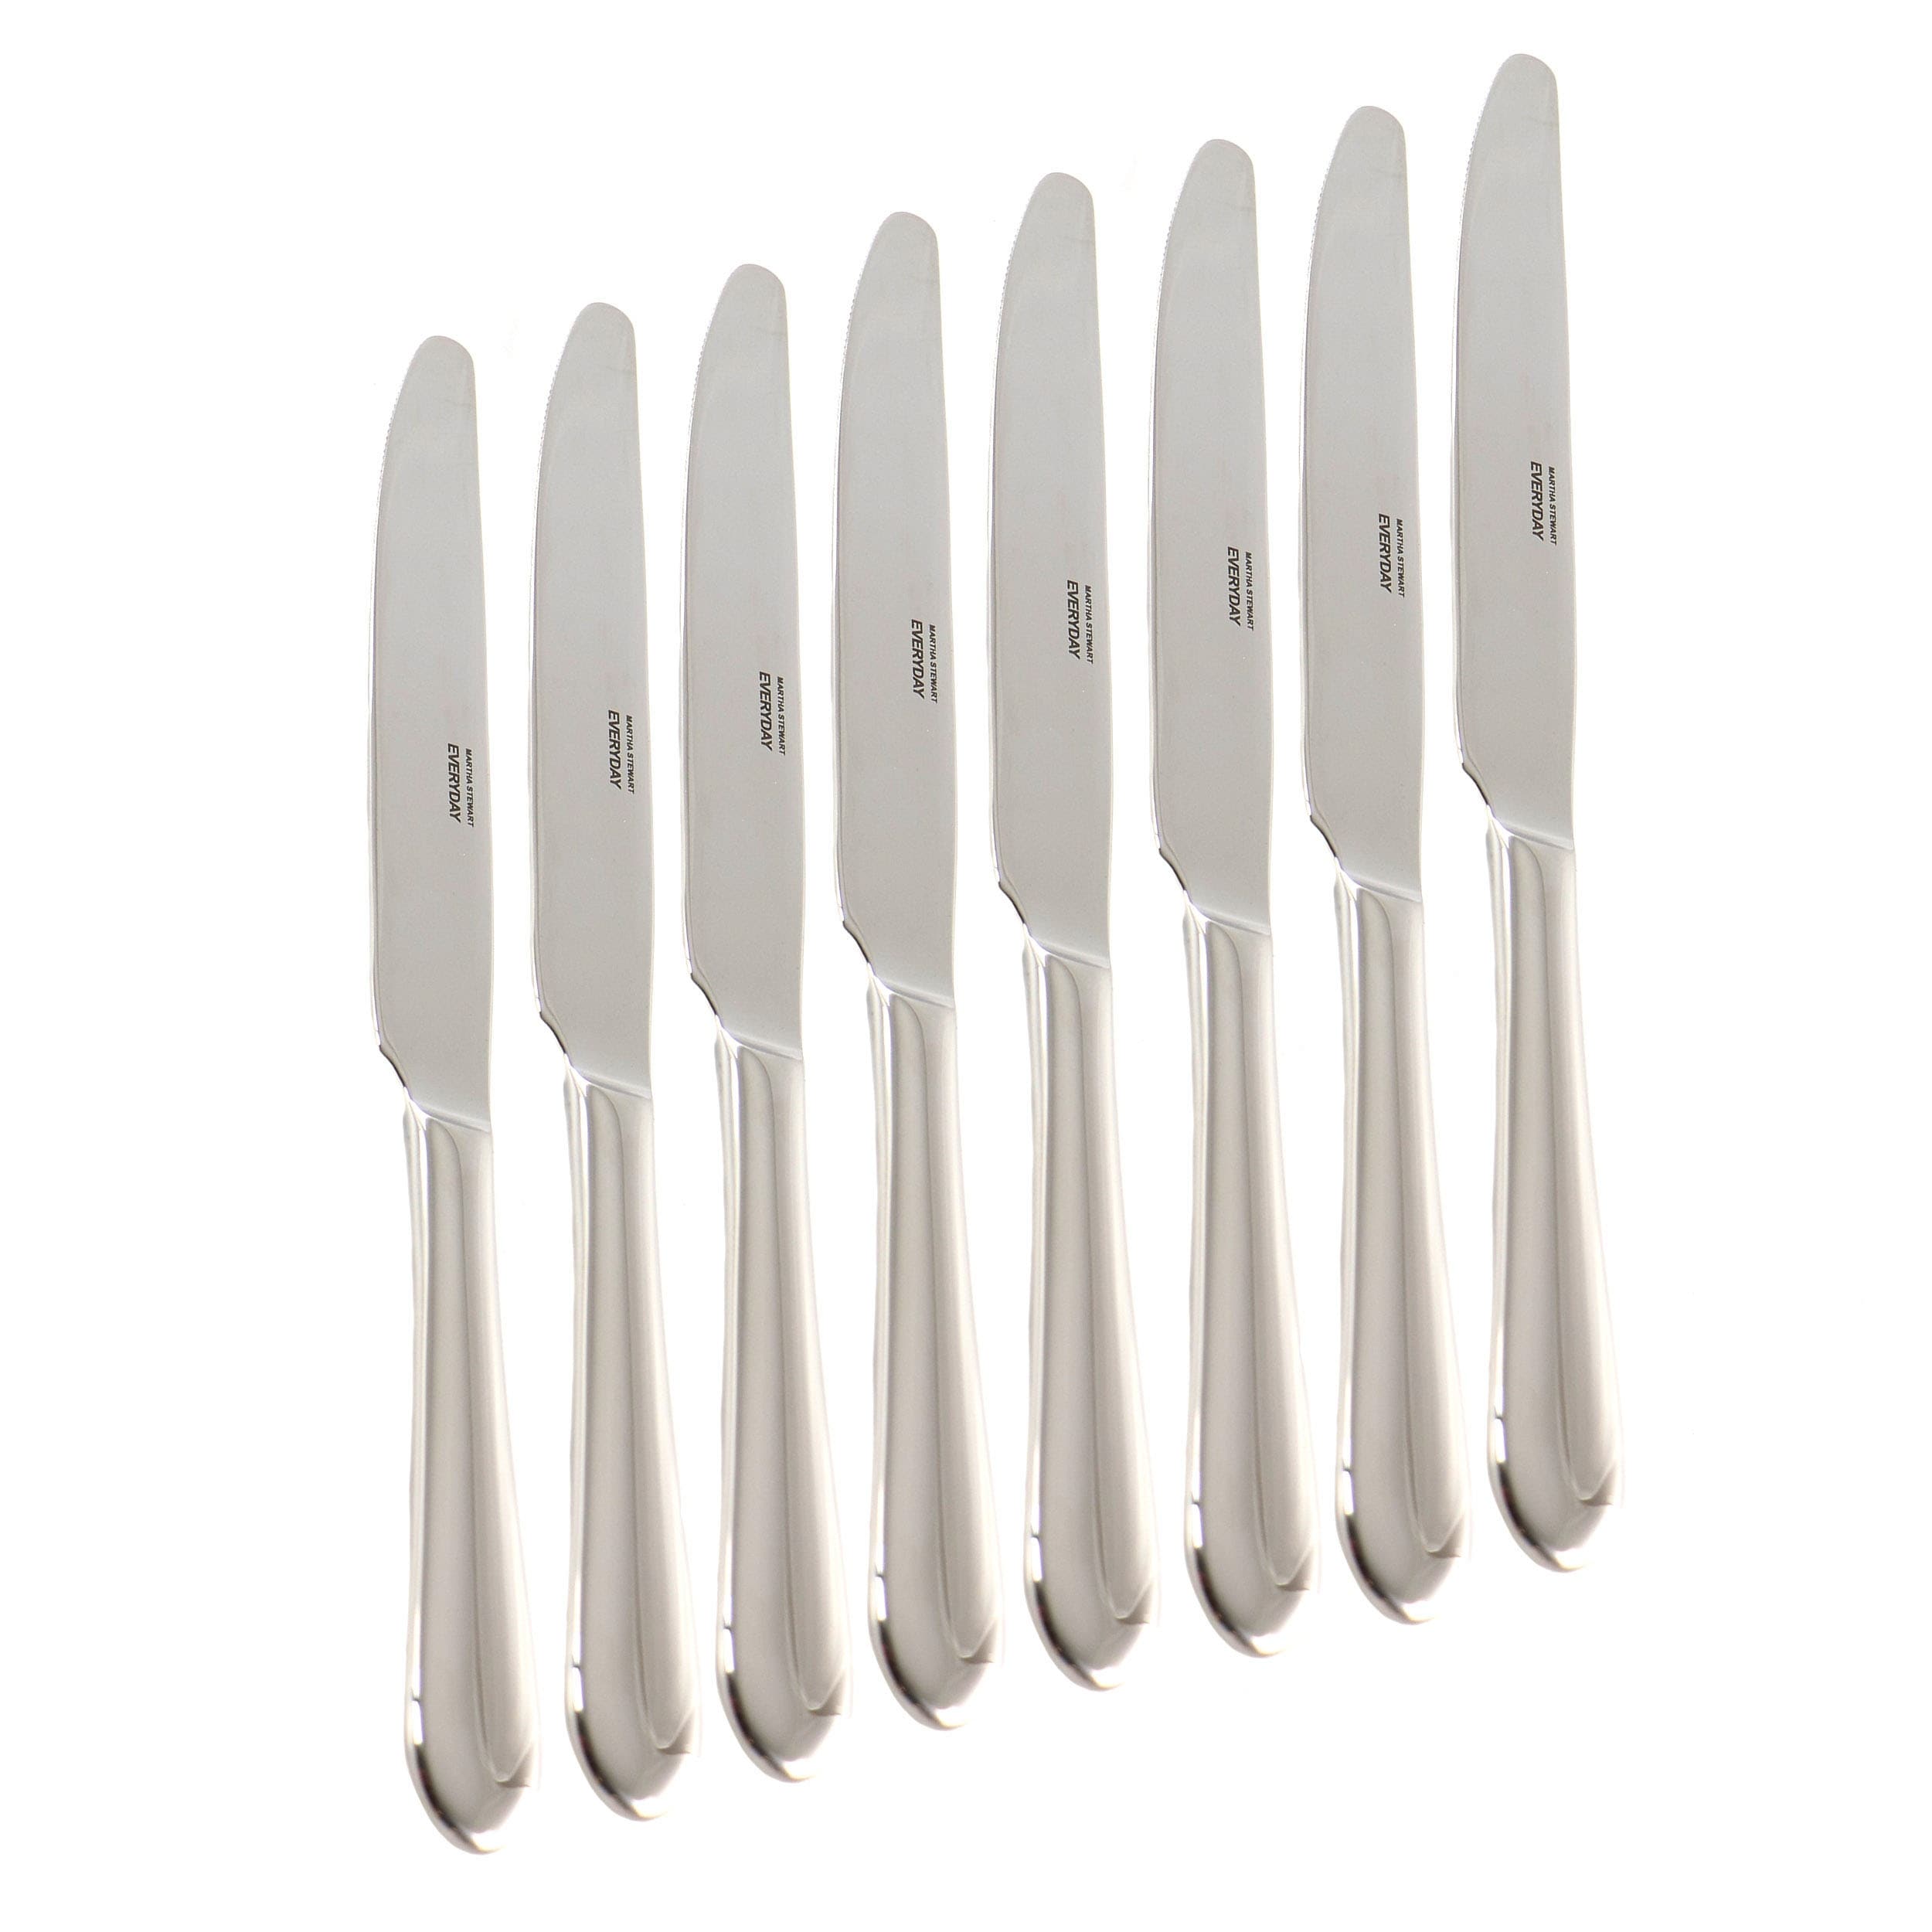 https://ak1.ostkcdn.com/images/products/is/images/direct/39fa6fd932aeff1146883965131ea3a3ed35c227/Martha-Stewart-Everyday-8-Piece-Stainless-Steel-Dinner-Knife-Set.jpg